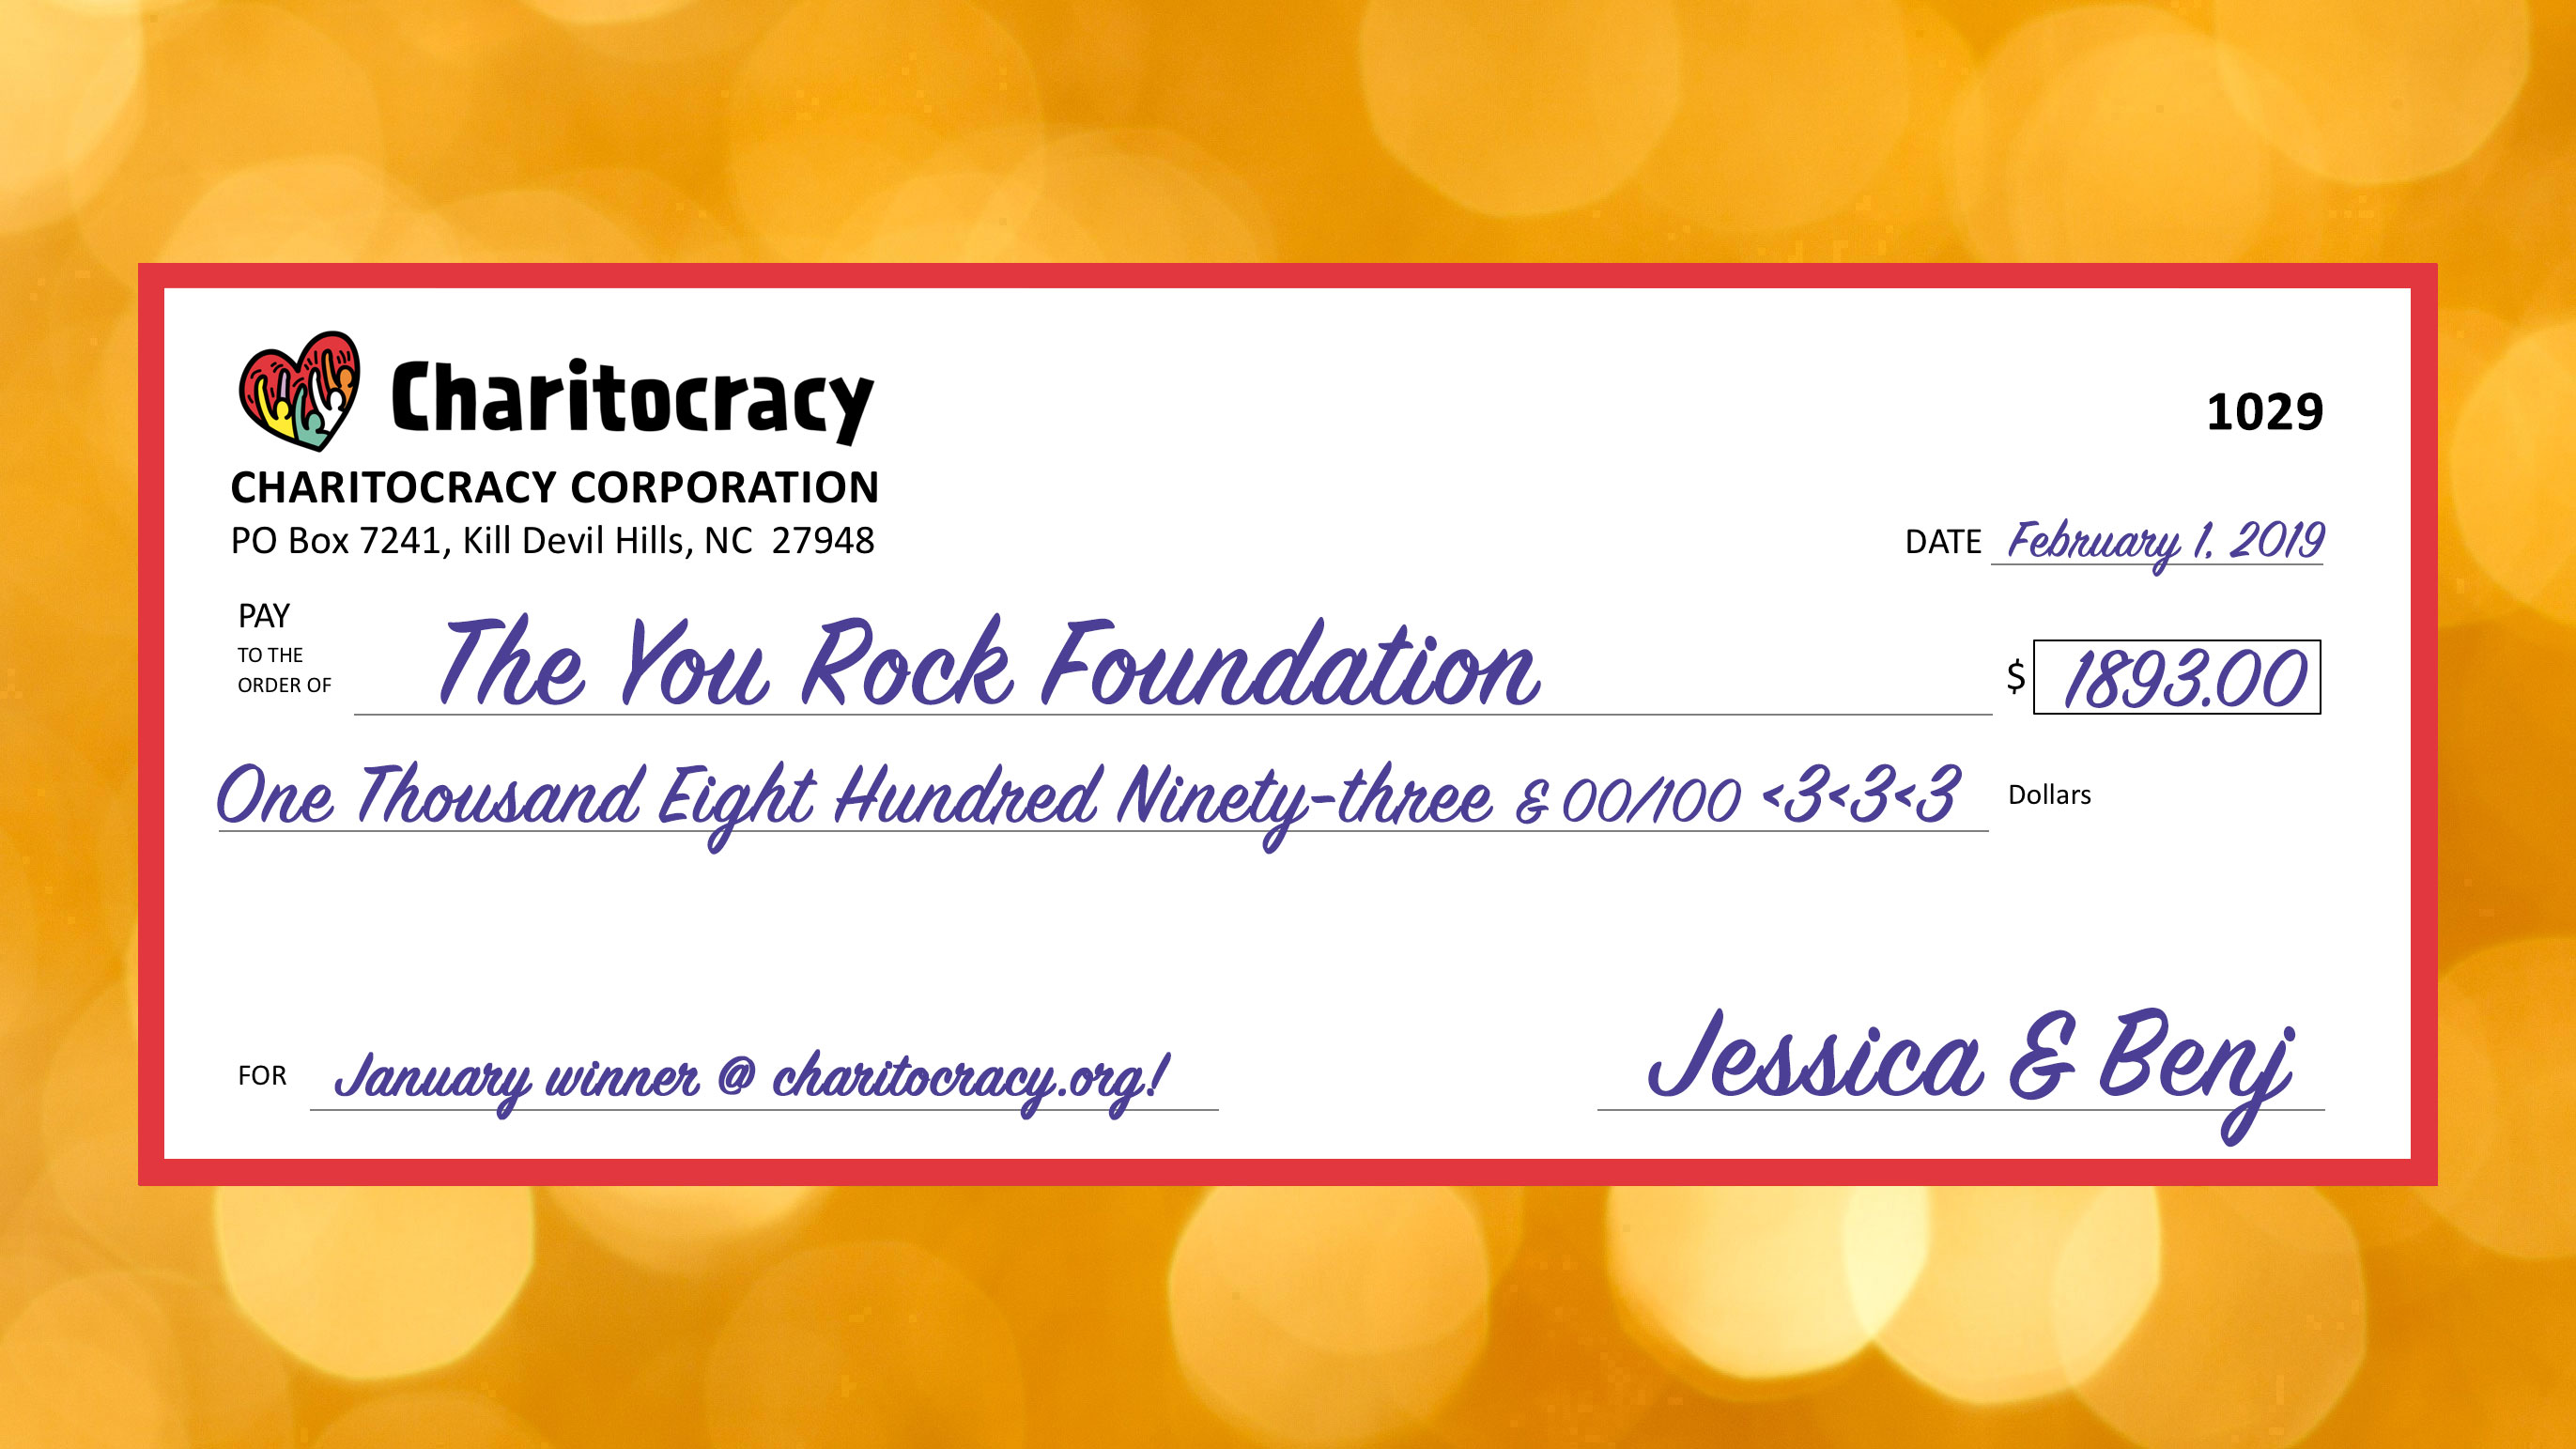 Charitocracy's 29th check to January winner The You Rock Foundation for $1893